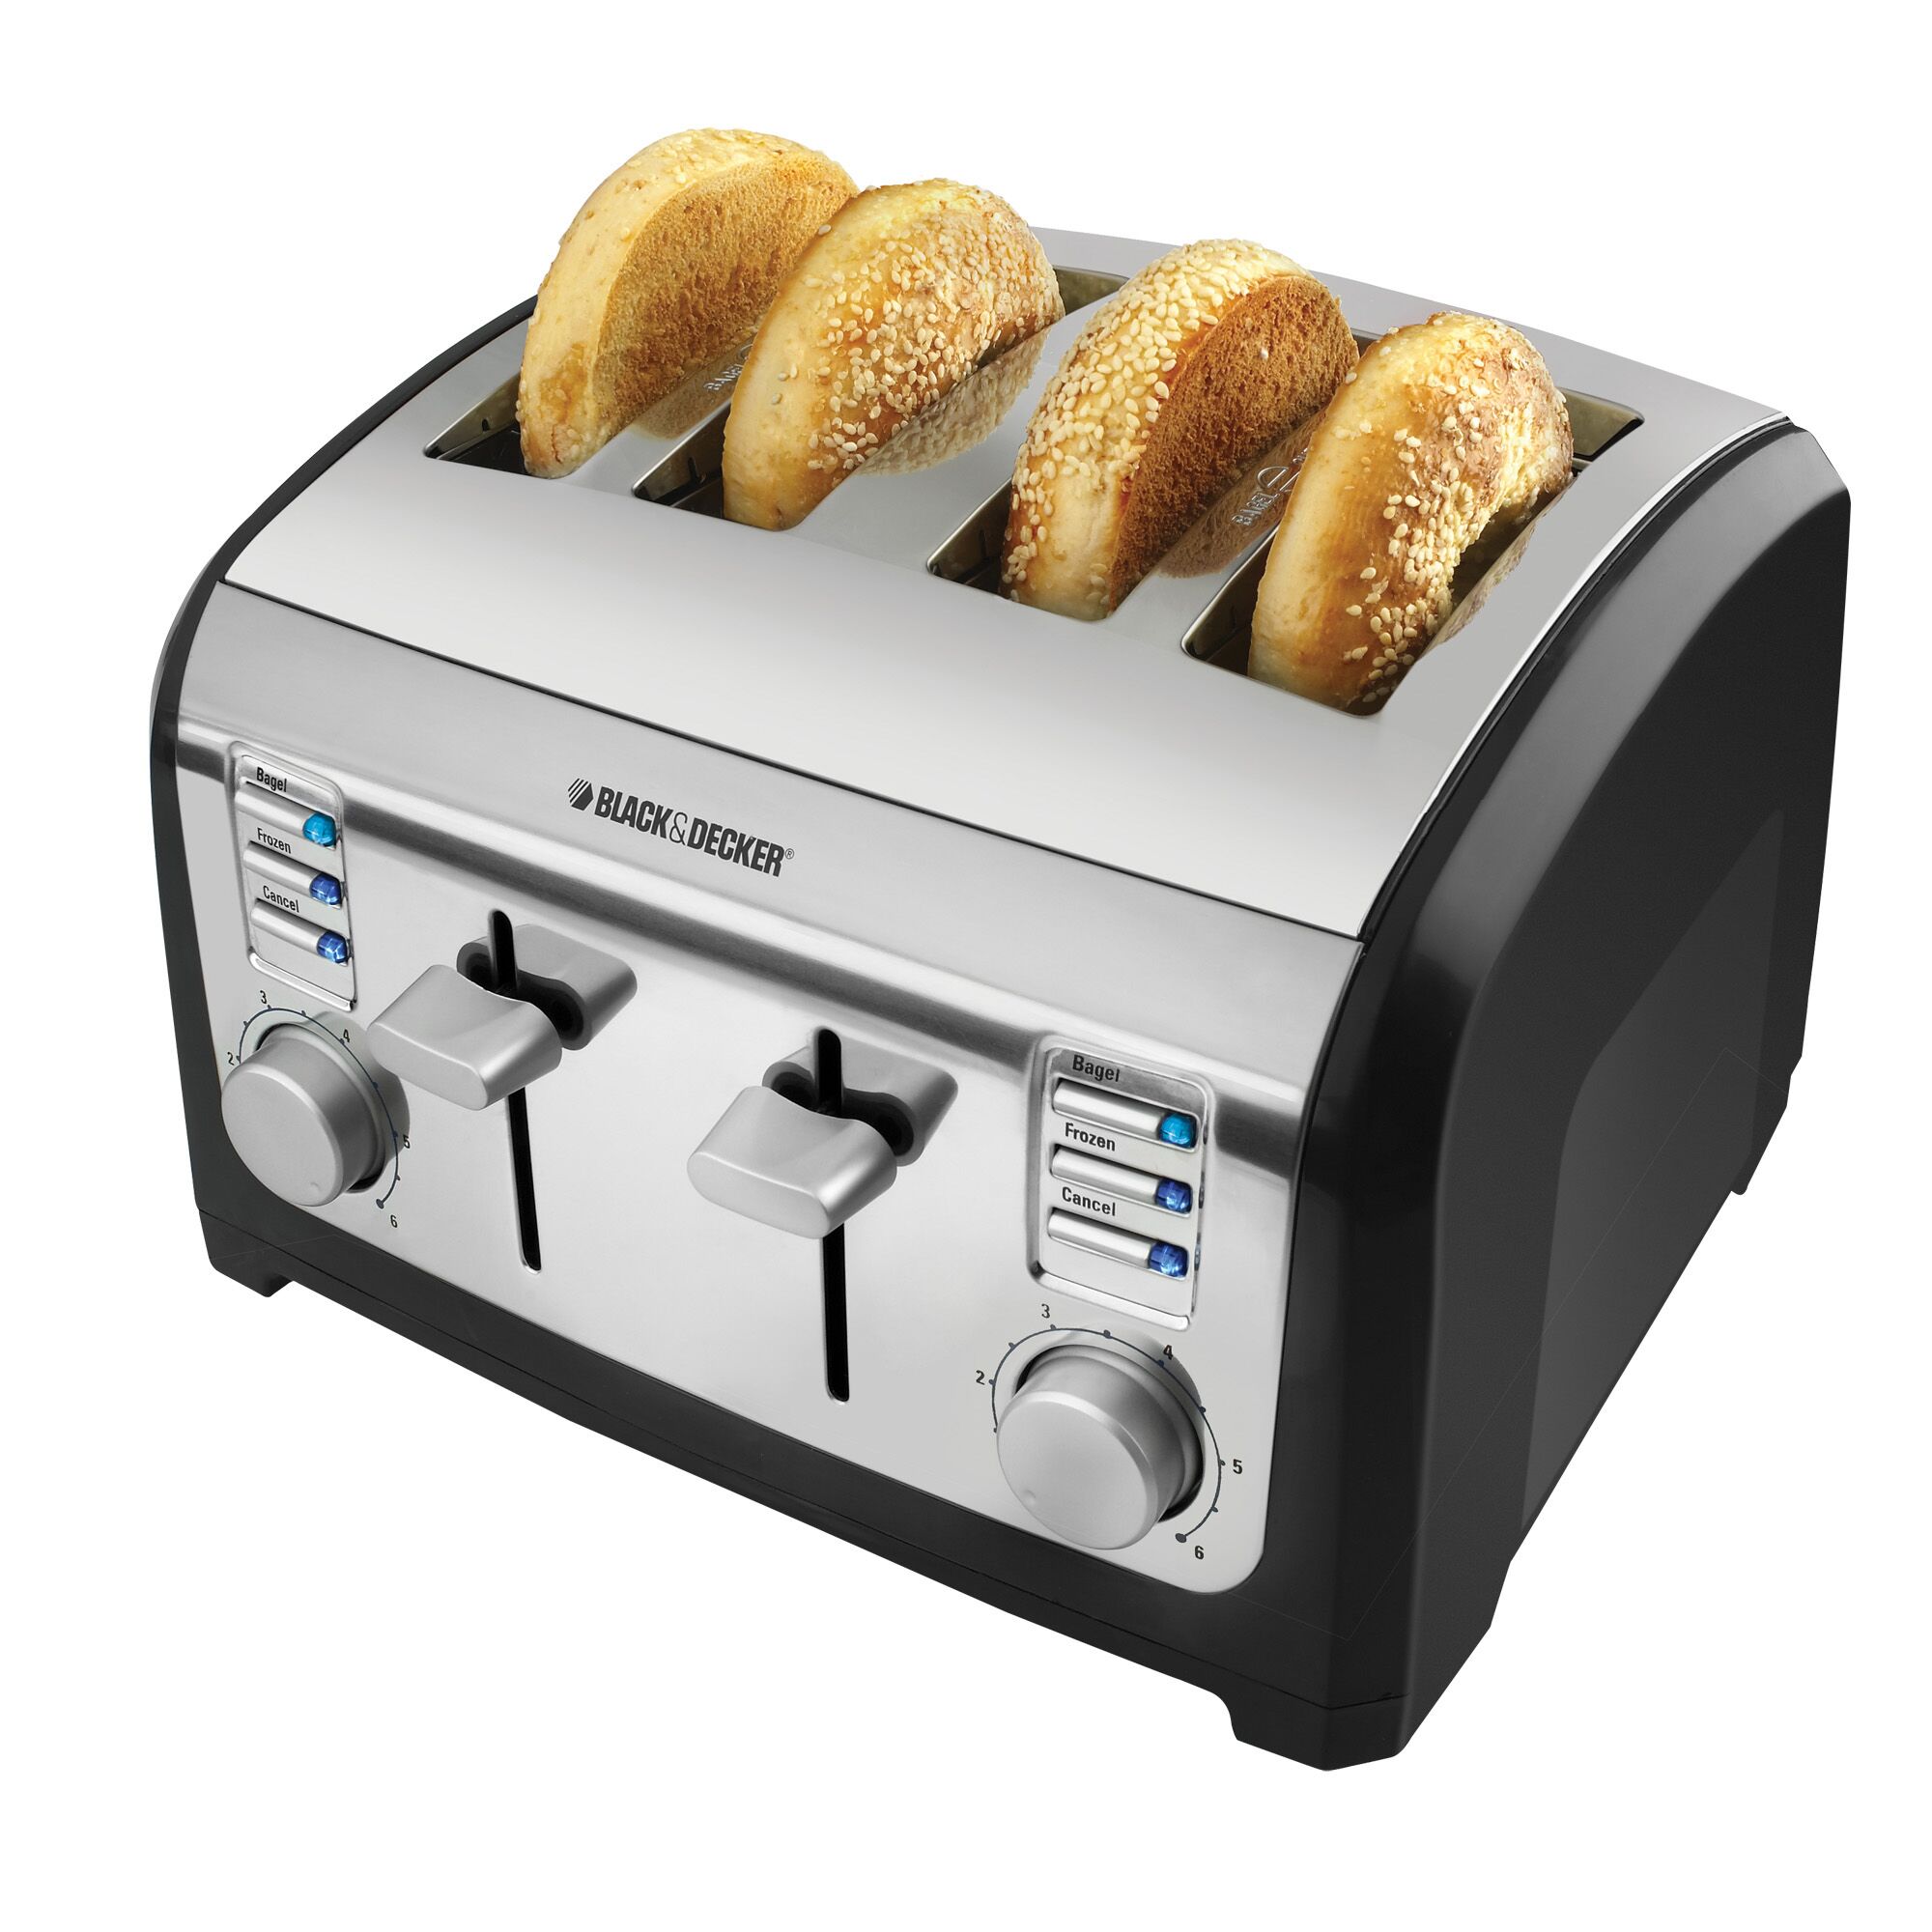 4-Slice Toaster with 4 slices of bagels one in each of the toaster slots